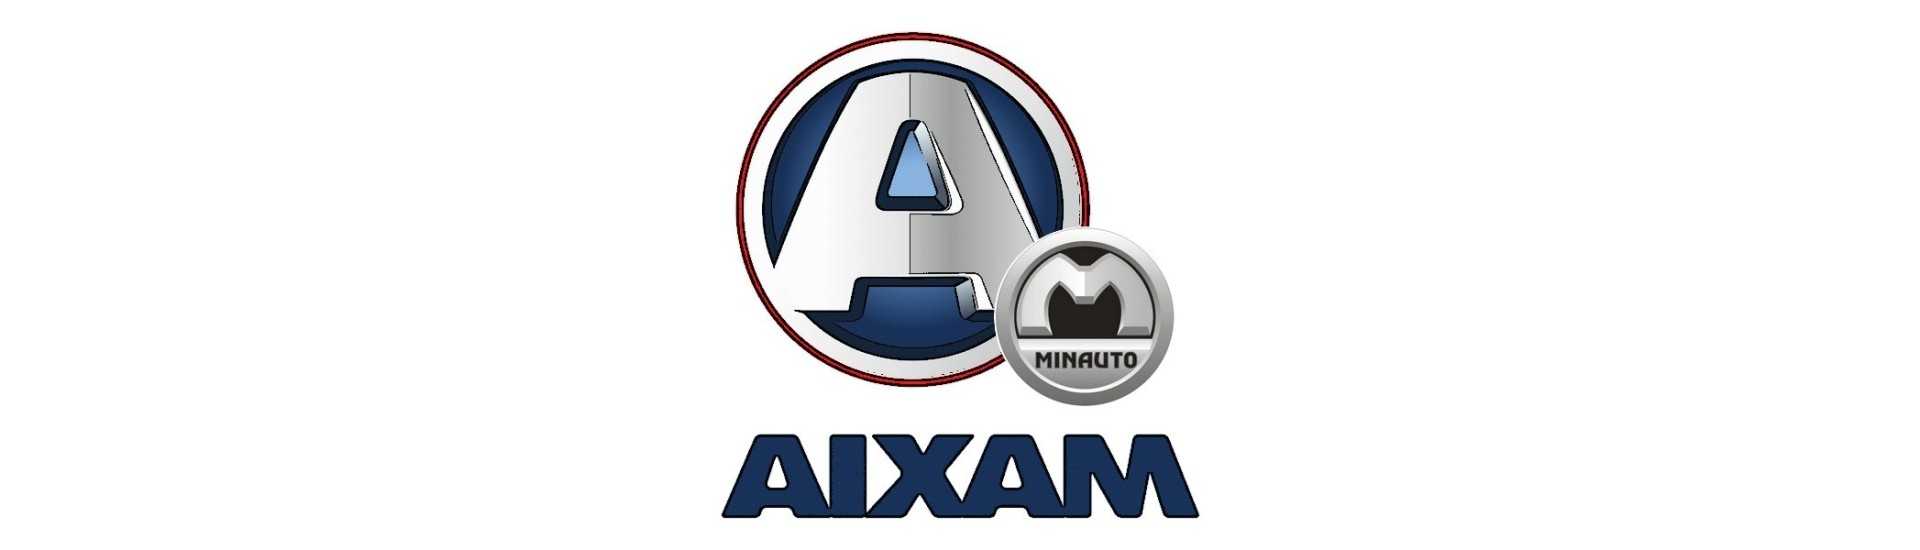 Door stop at the best price for car without a permit Aixam Minauto